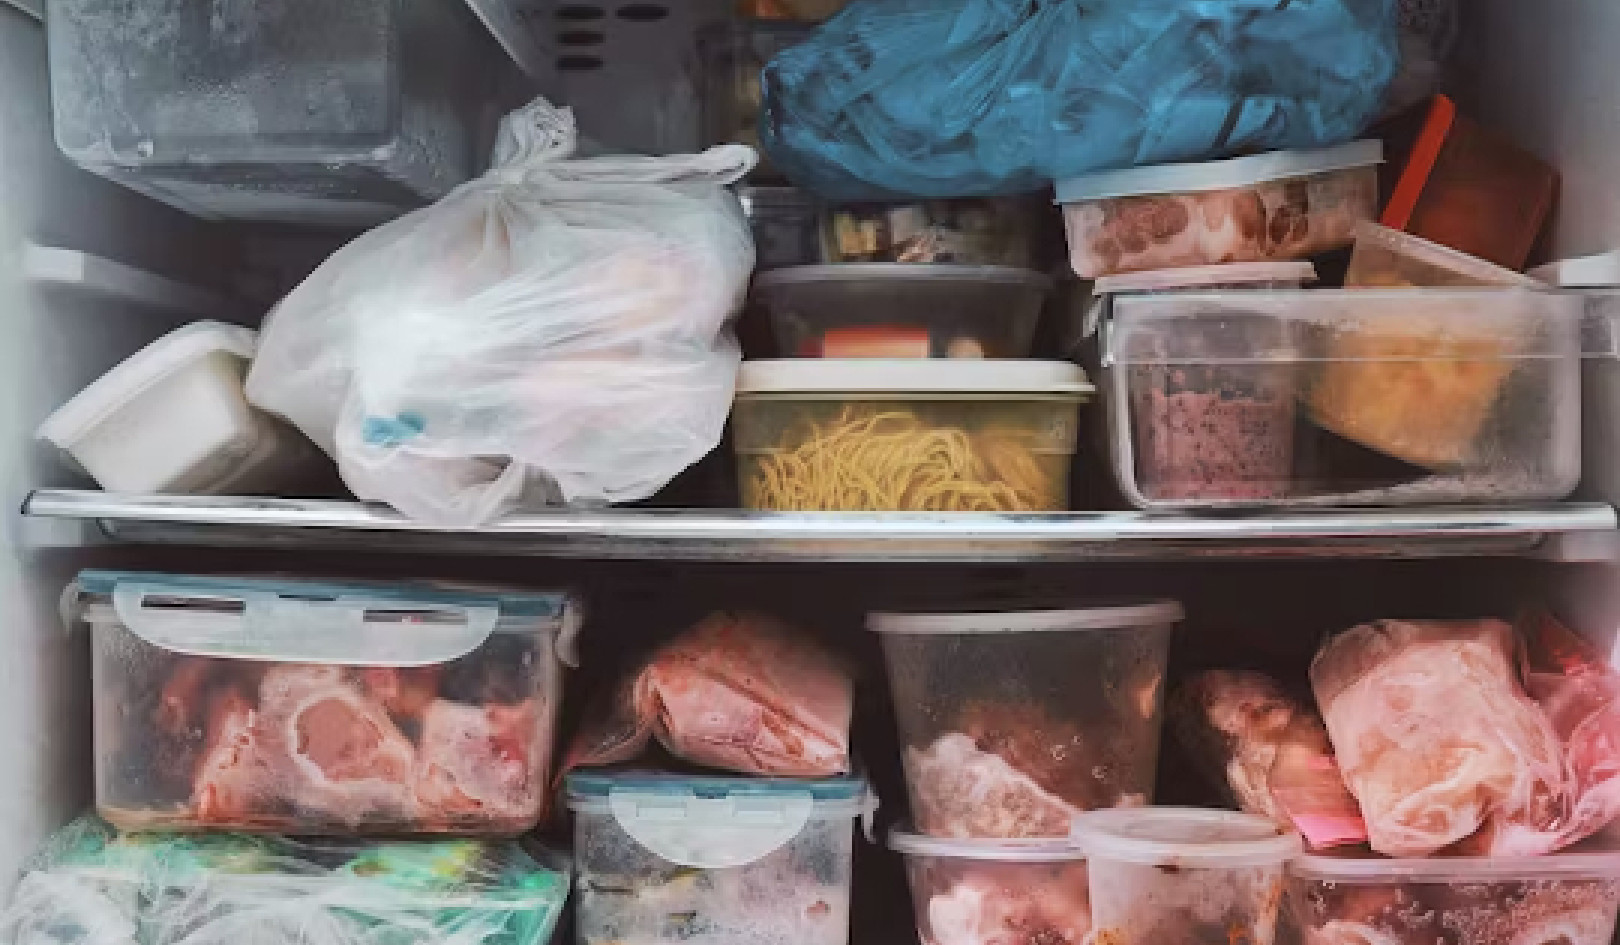 What You Can Do about Bad Freezer Smells